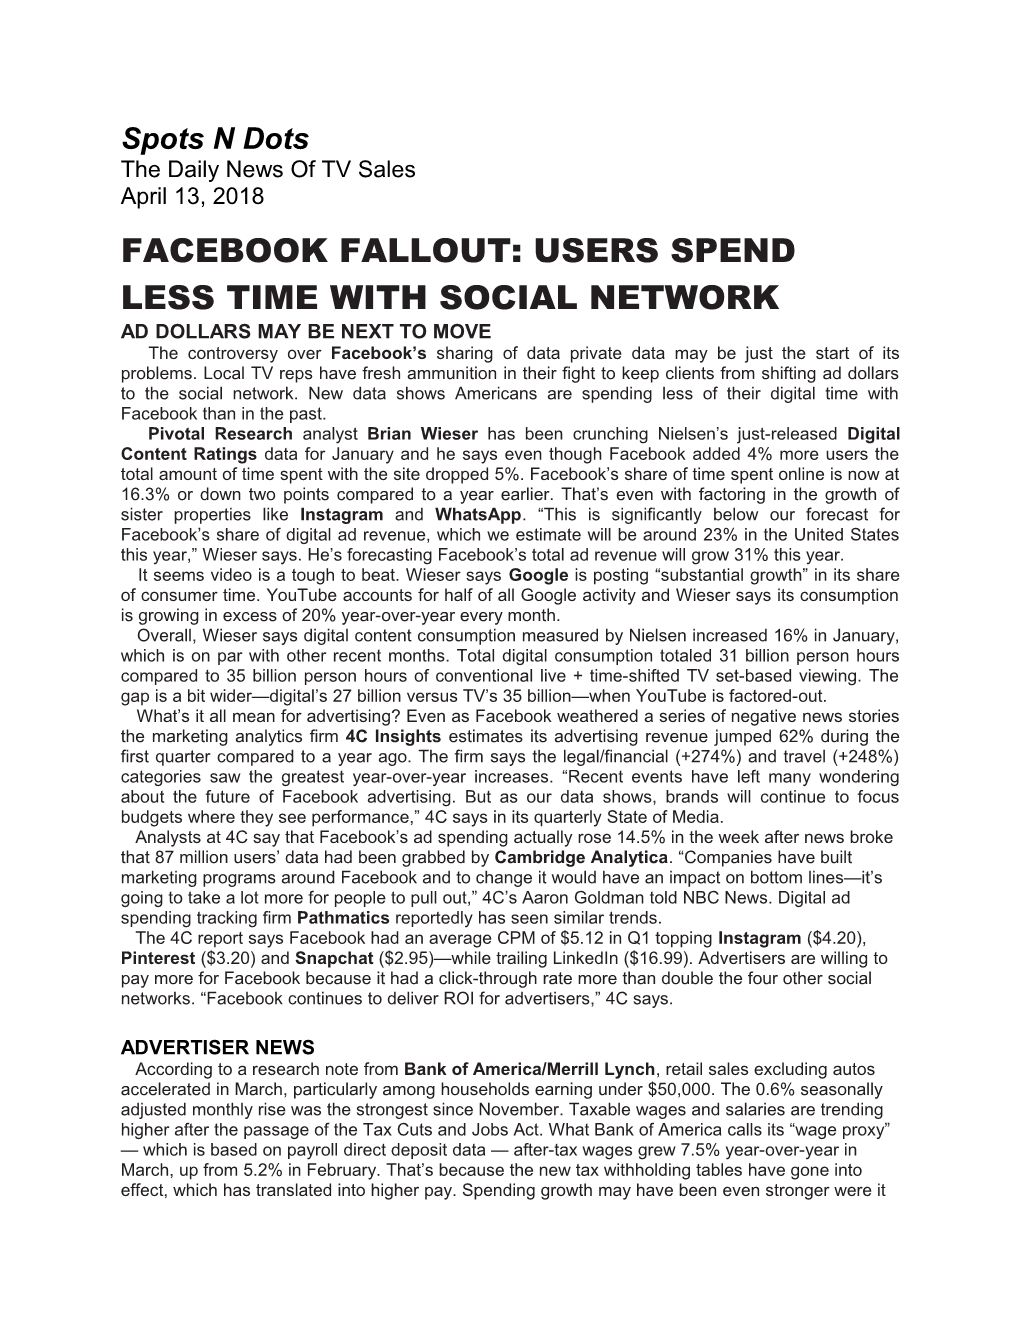 Facebook Fallout: Users Spend Less Time with Social Network